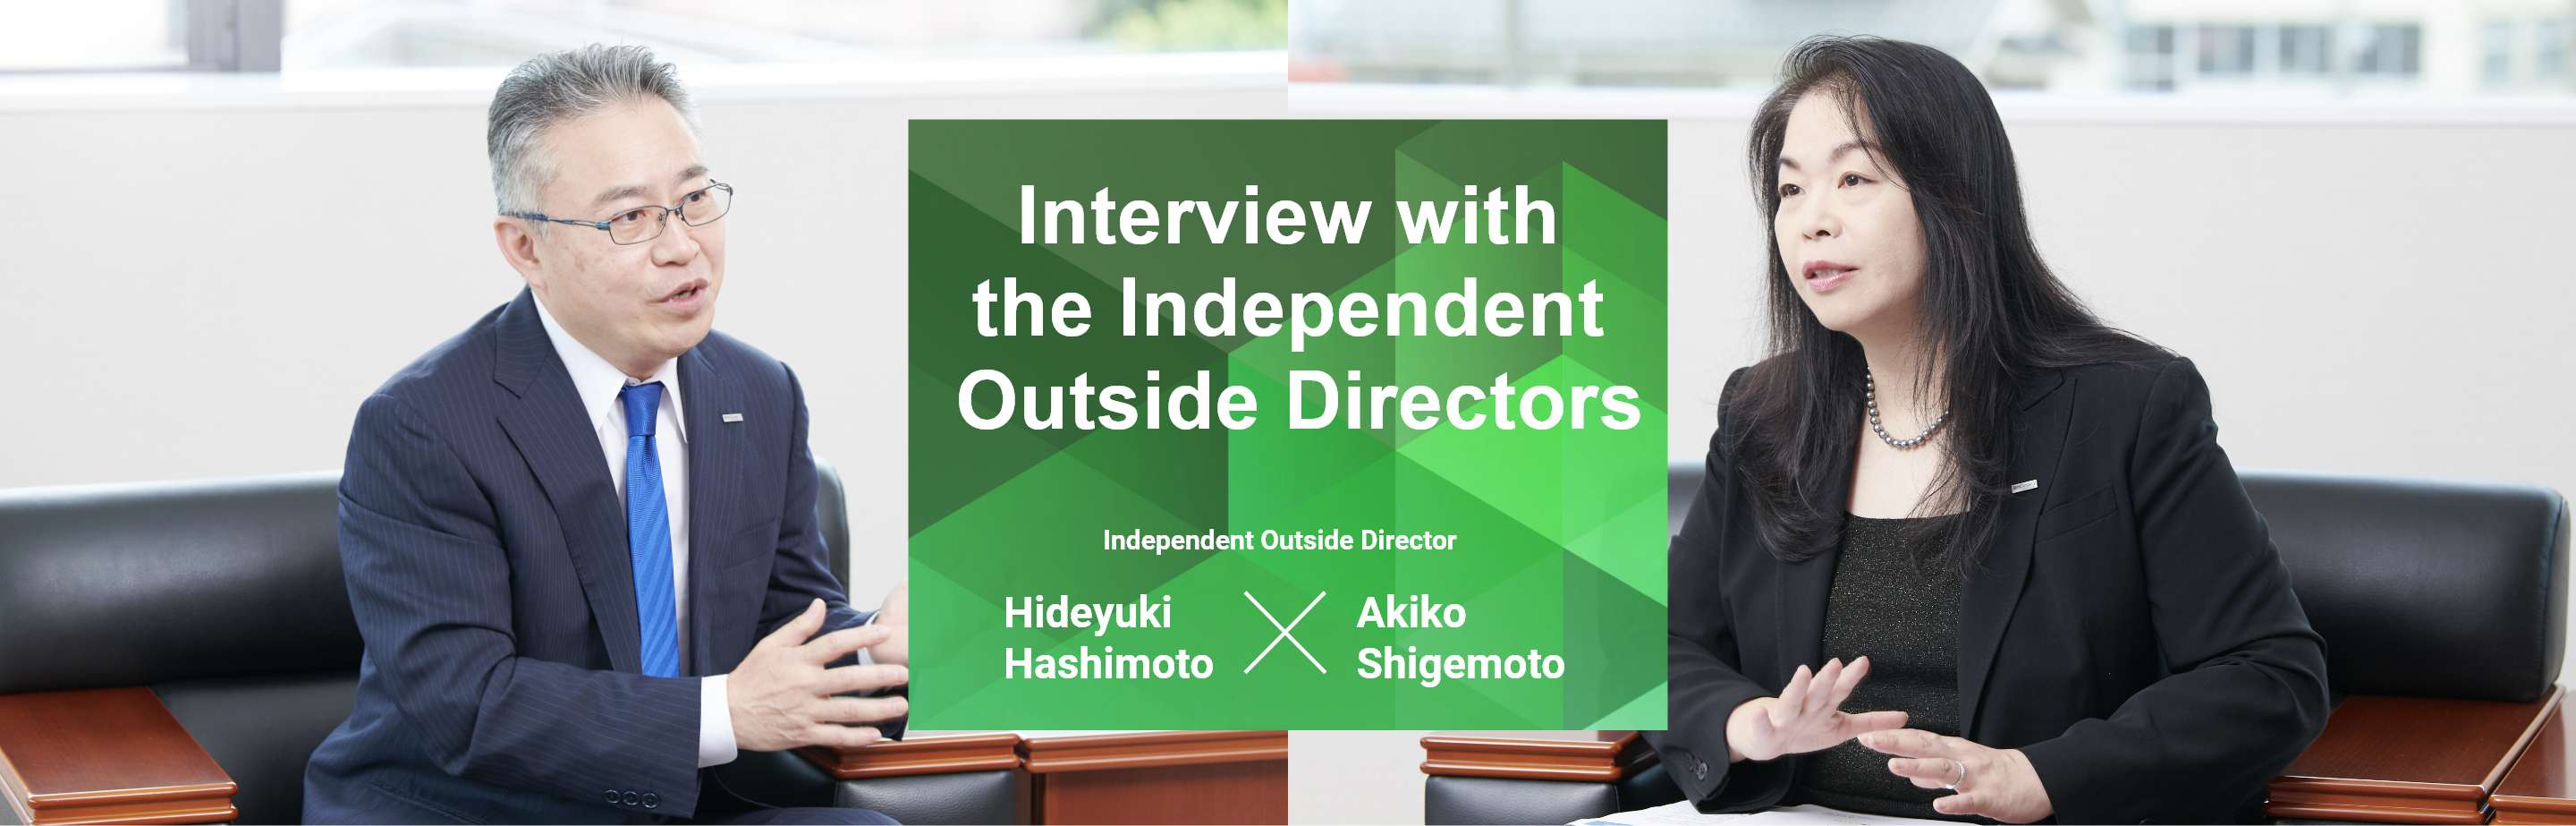 Interview with the Independent Outside Directors